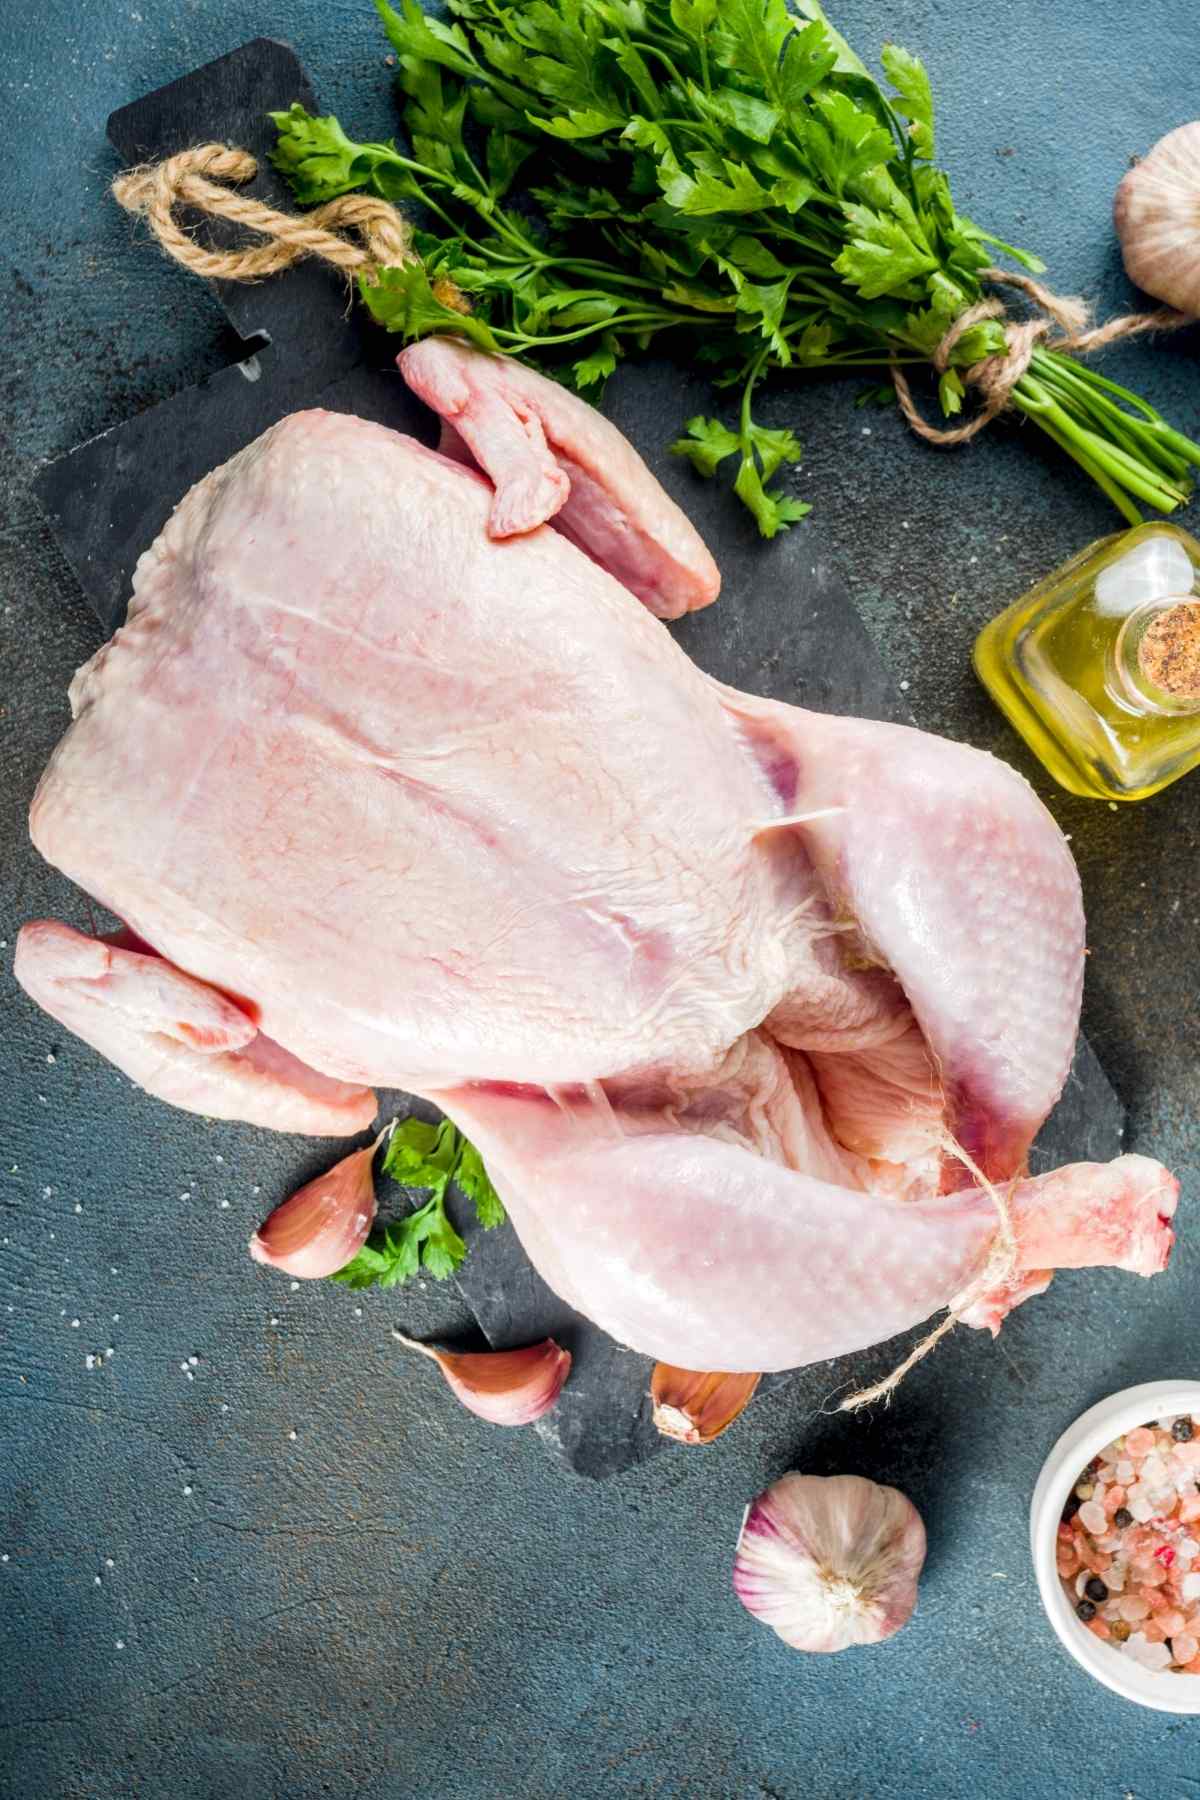 If you’re wondering how long frozen chicken can be left at room temperature, you’re not alone. It’s a question that many home cooks have wondered about.